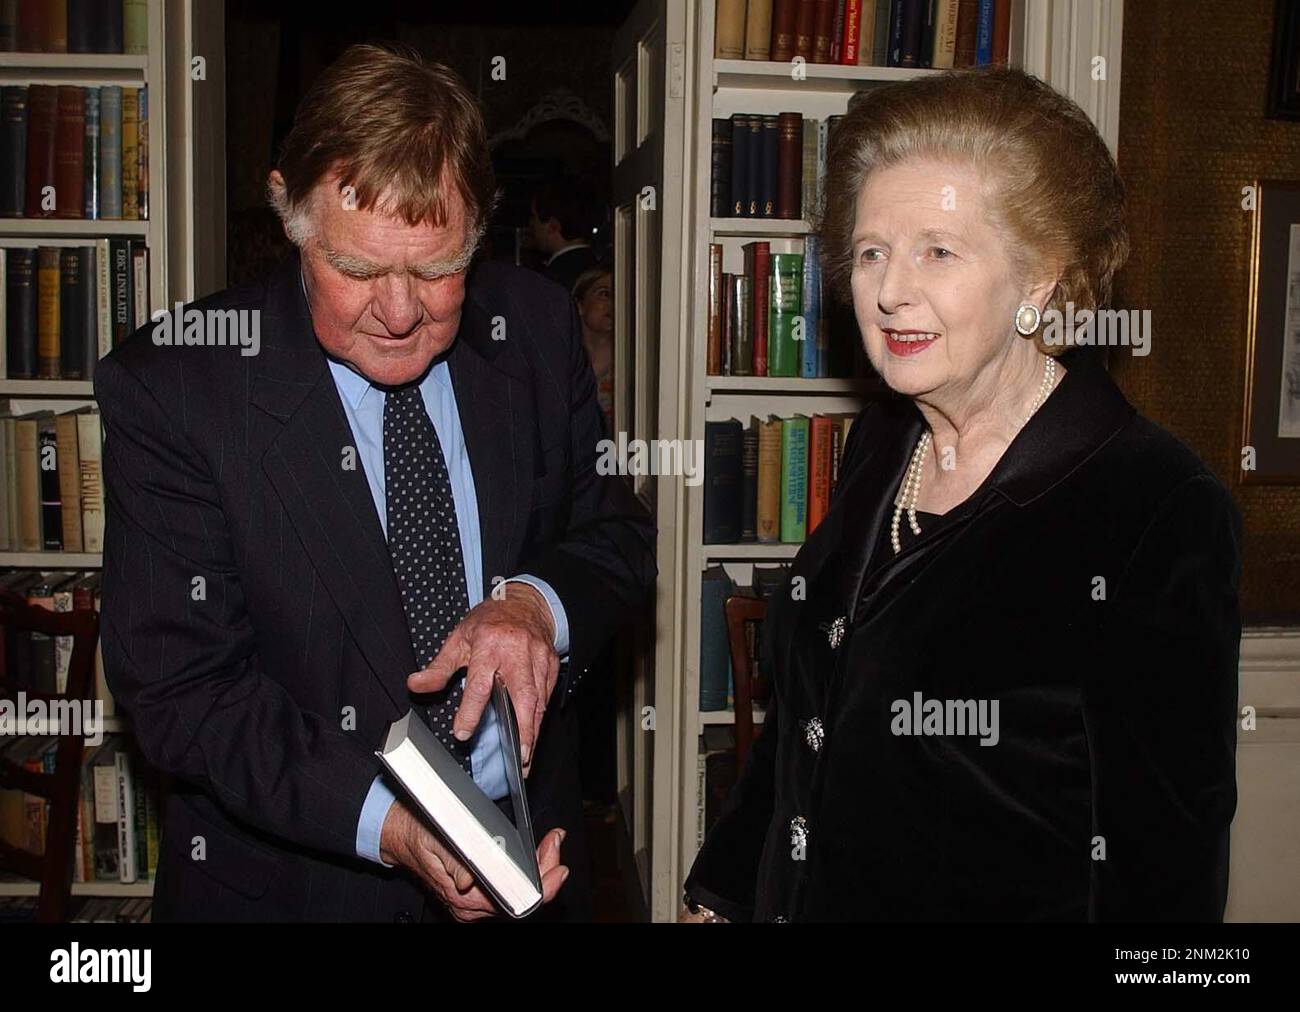 File photo dated 24/03/03 of Sir Bernard Ingham with former Prime Minister Baroness Thatcher, at the reception to mark the launch of his book The wages of spin, at his publishers in central London. Sir Bernard Ingham, the long-serving press secretary for Margaret Thatcher, has died aged 90 after a short illness, his family have said. Stock Photo